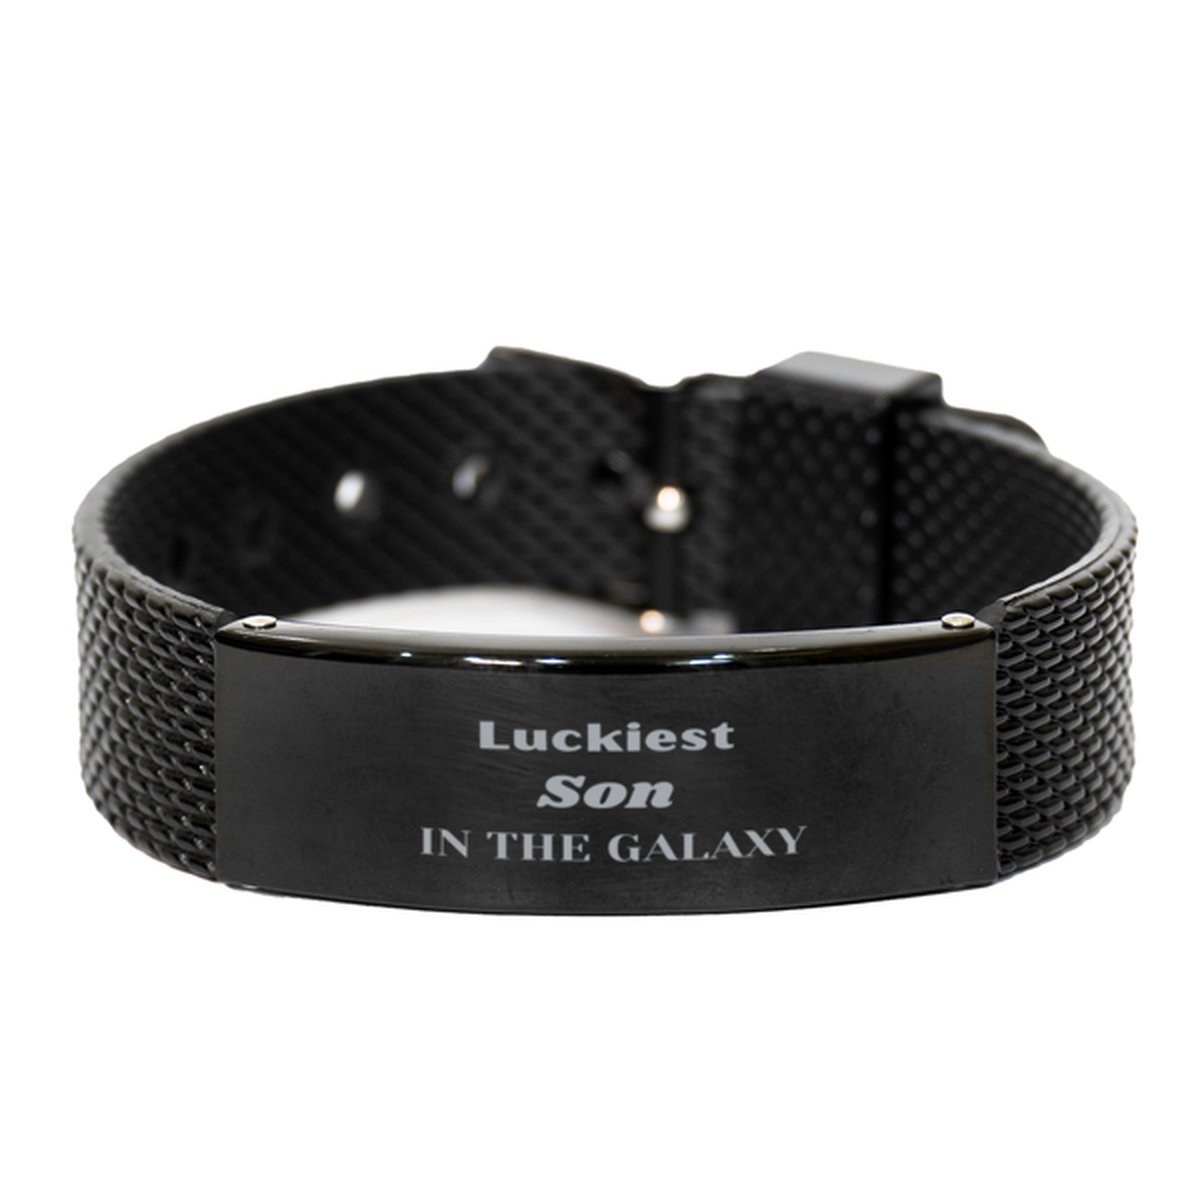 Luckiest Son in the Galaxy, To My Son Engraved Gifts, Christmas Son Black Shark Mesh Bracelet Gifts, X-mas Birthday Unique Gifts For Son Men Women